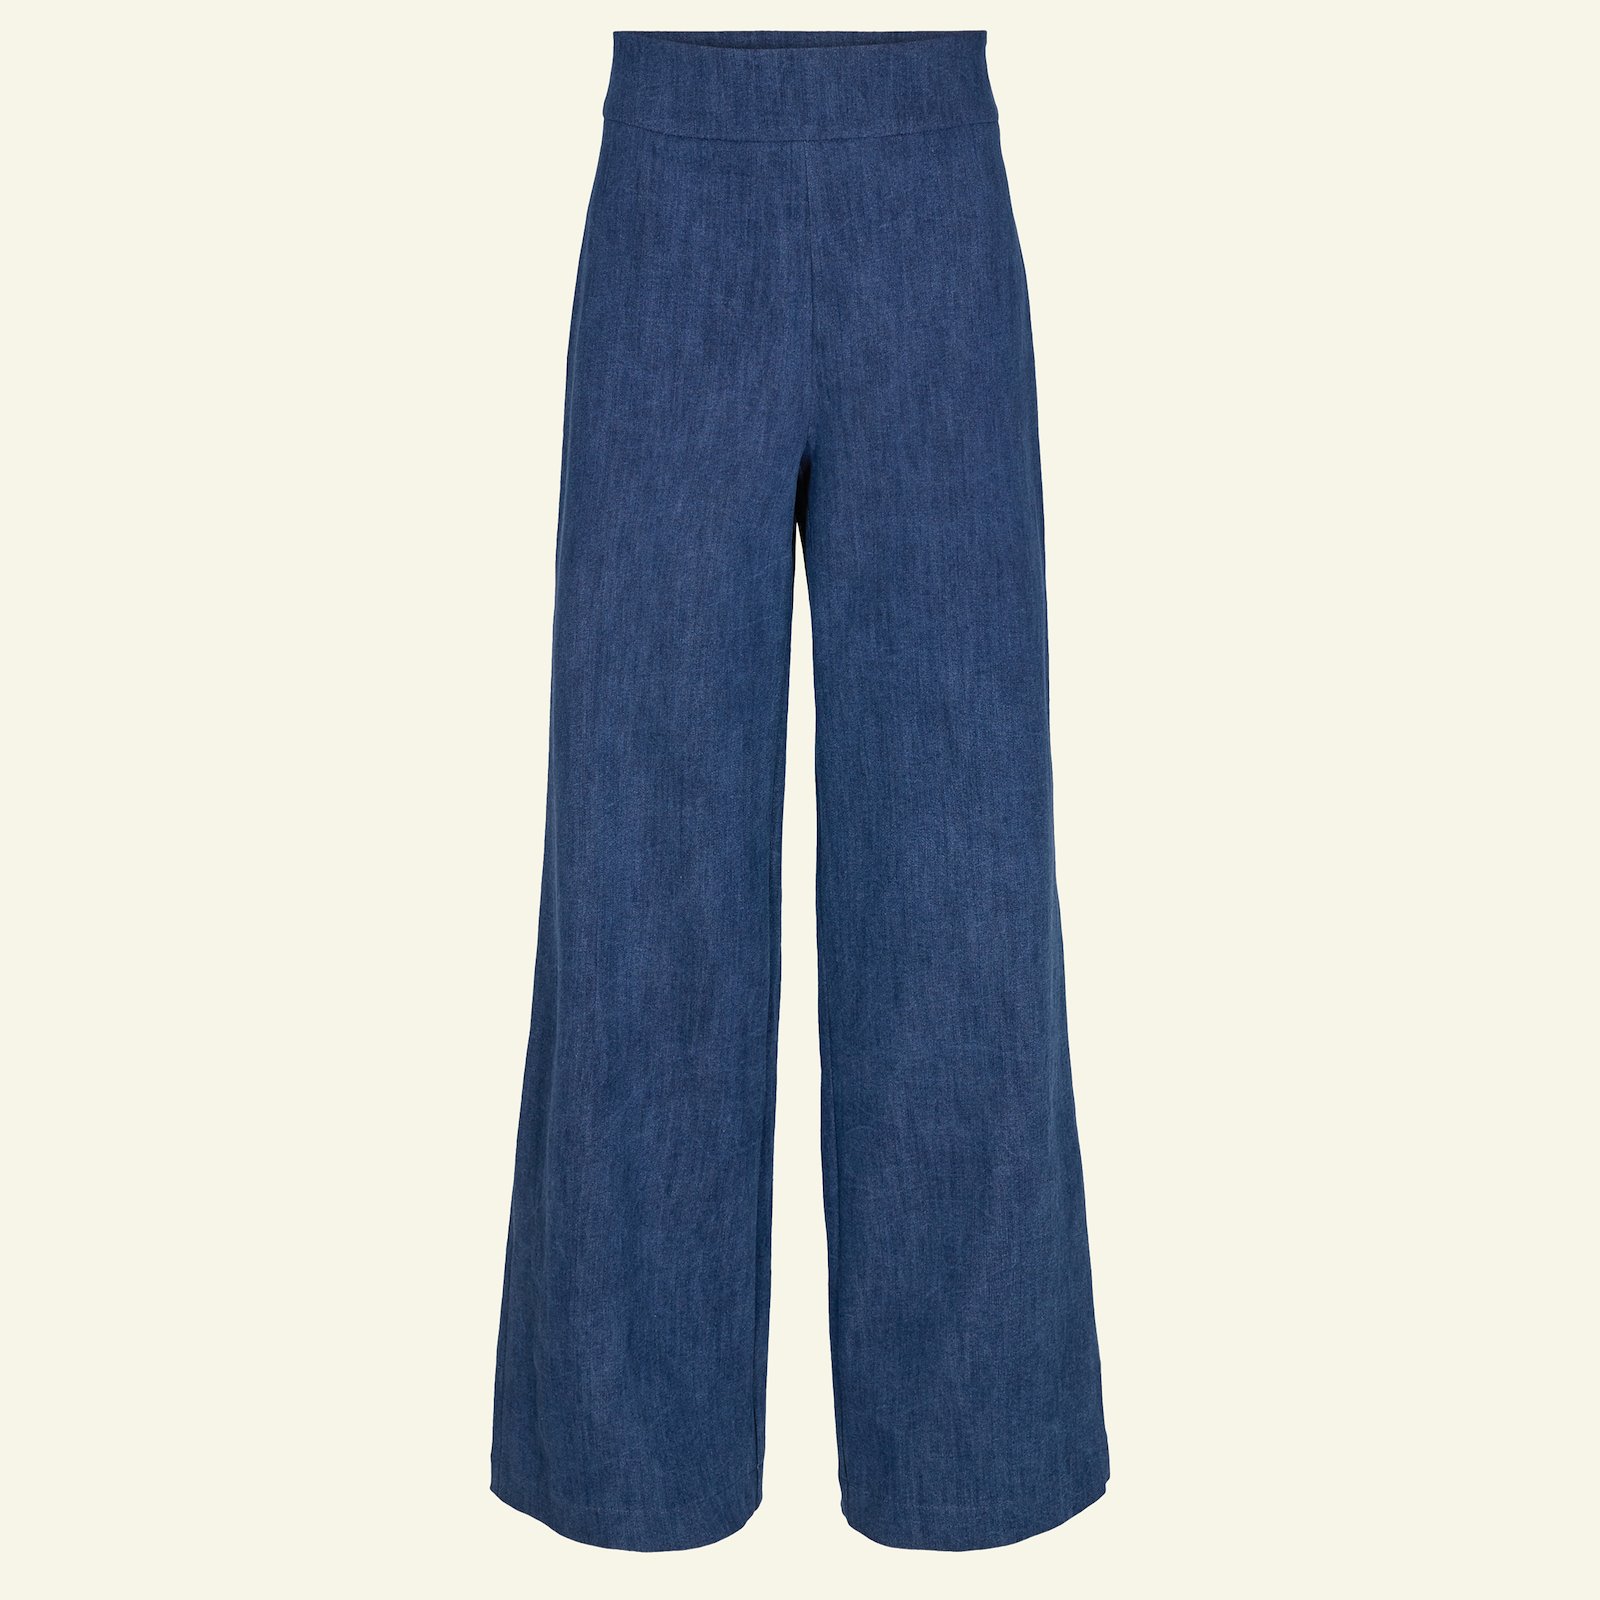 Highwaist and wide legs trousers, 36/8 p20052_460851_sskit